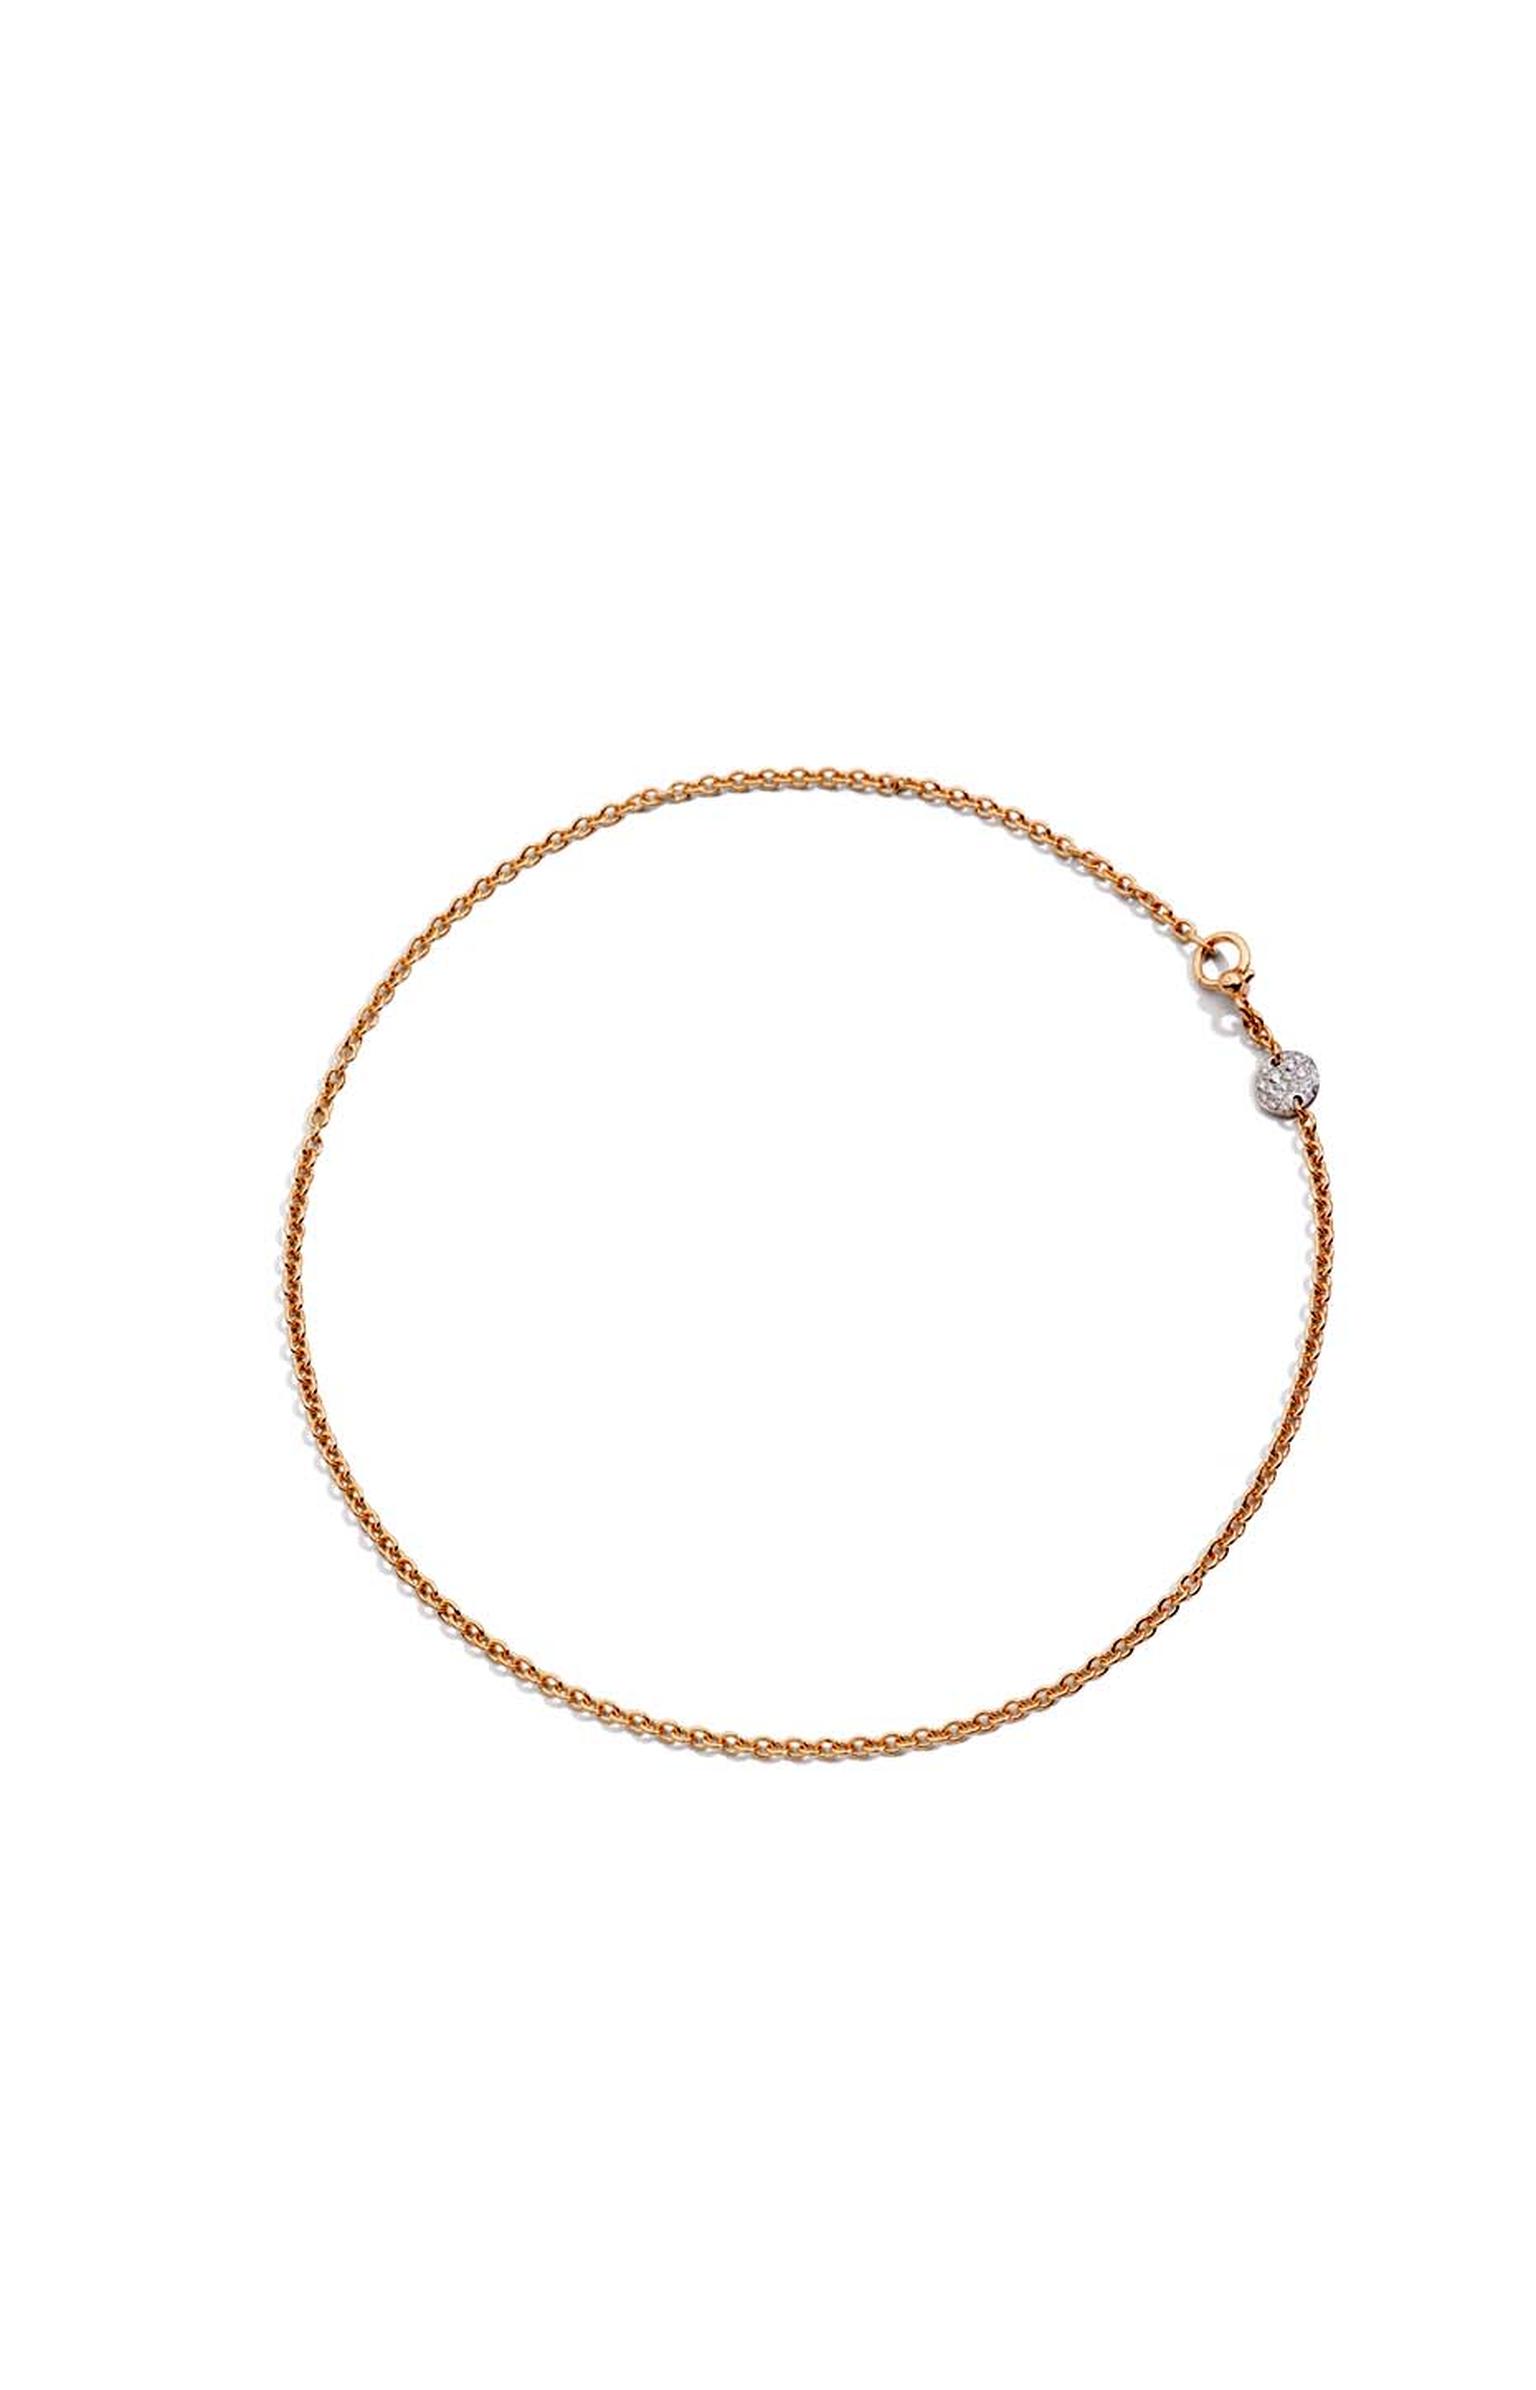 Pomellato Sabbia choker necklace featuring a rose gold disc set with white diamonds.